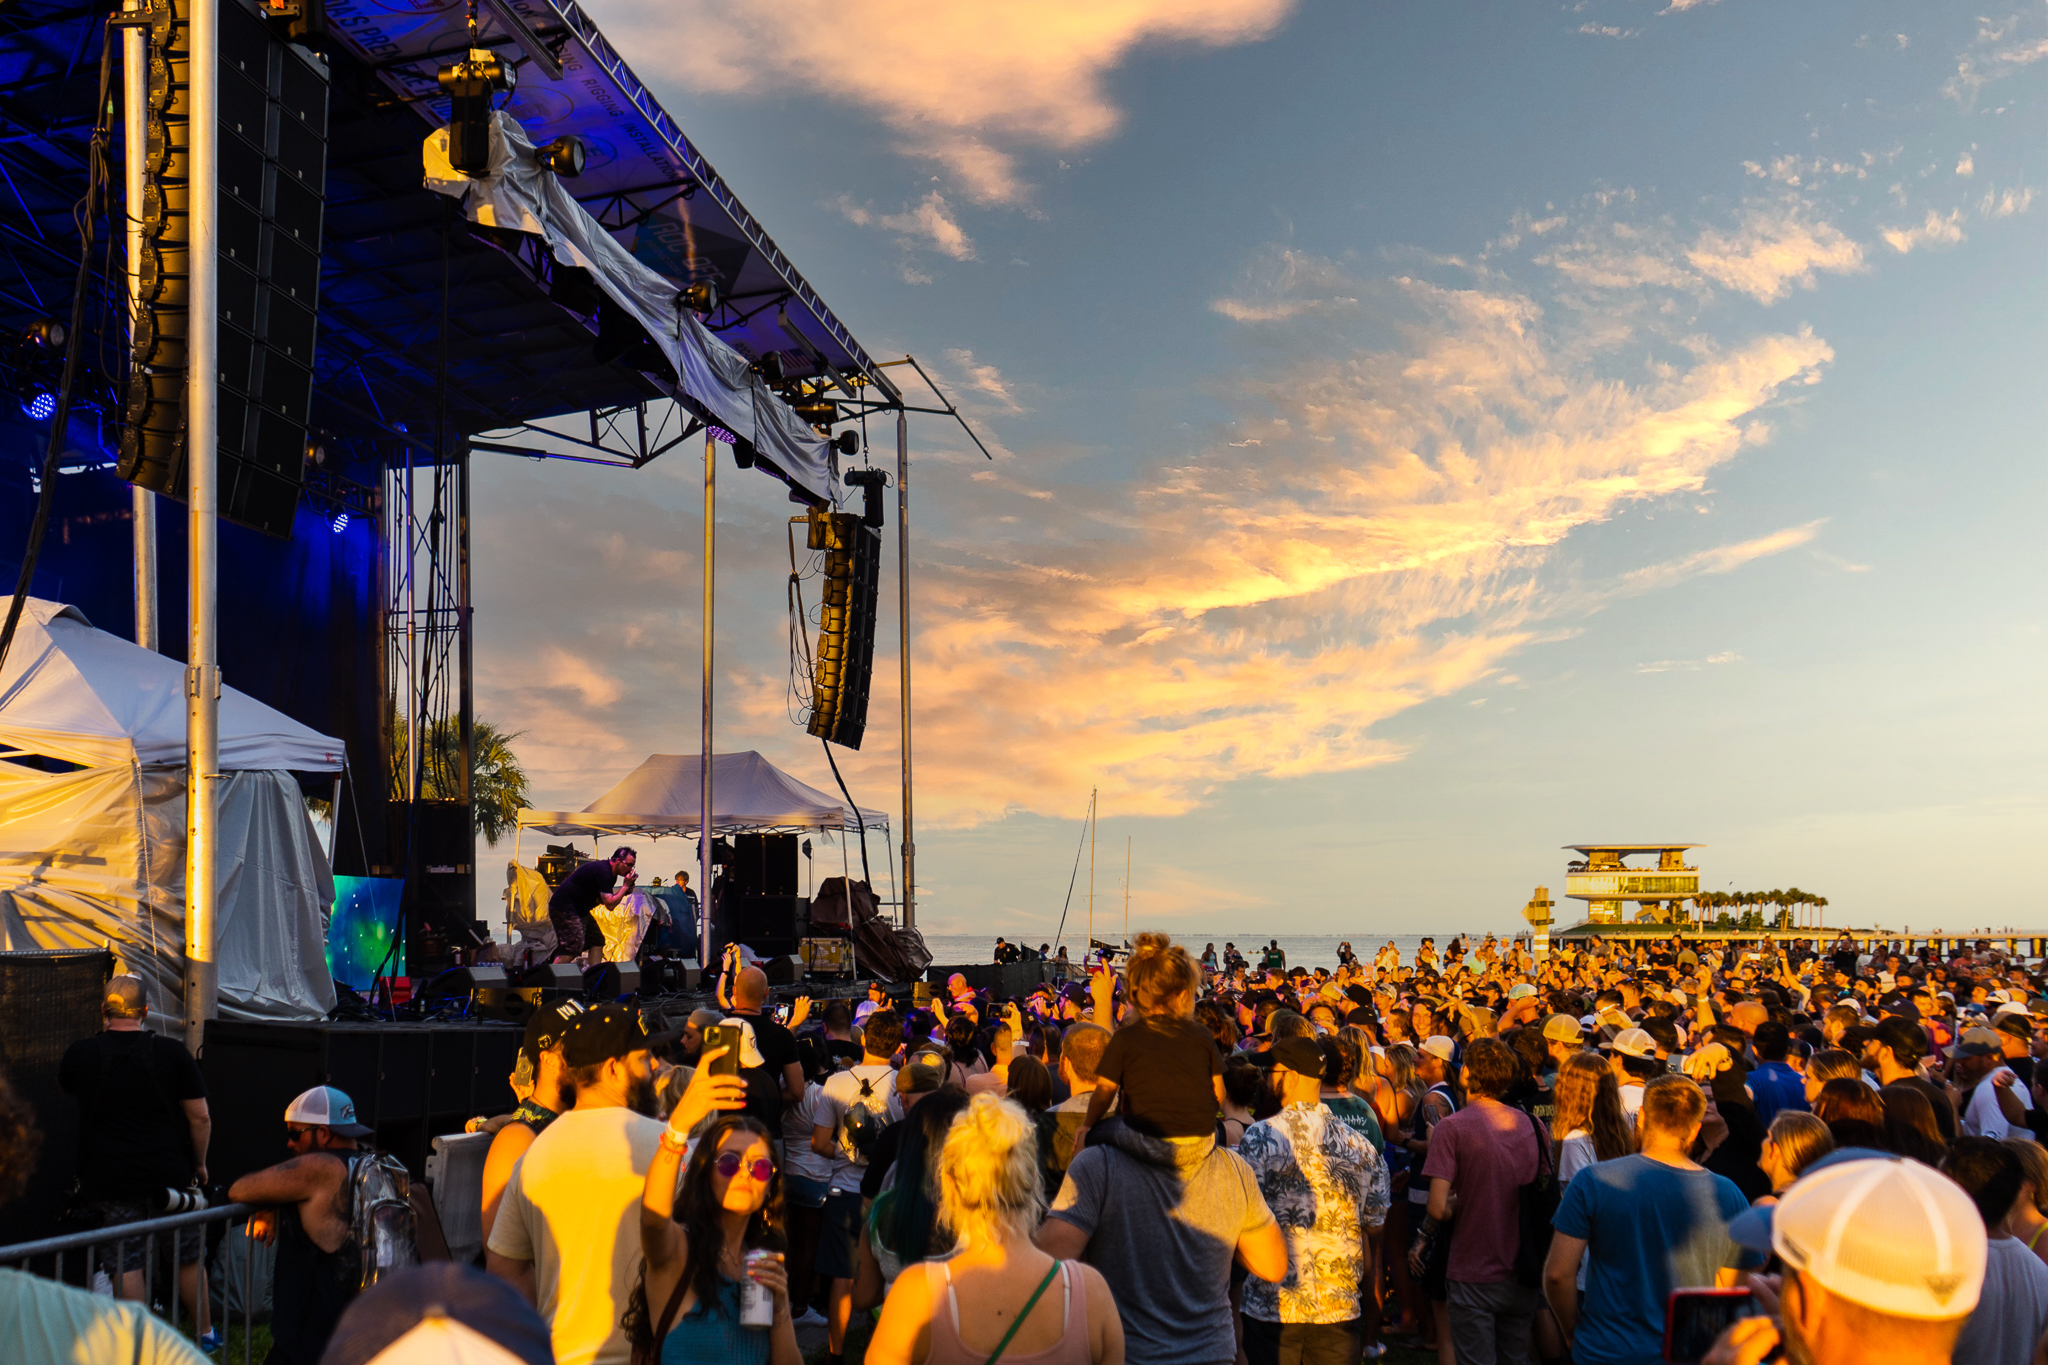 What to know about the St. Pete Pier concert series, from lineup to tickets